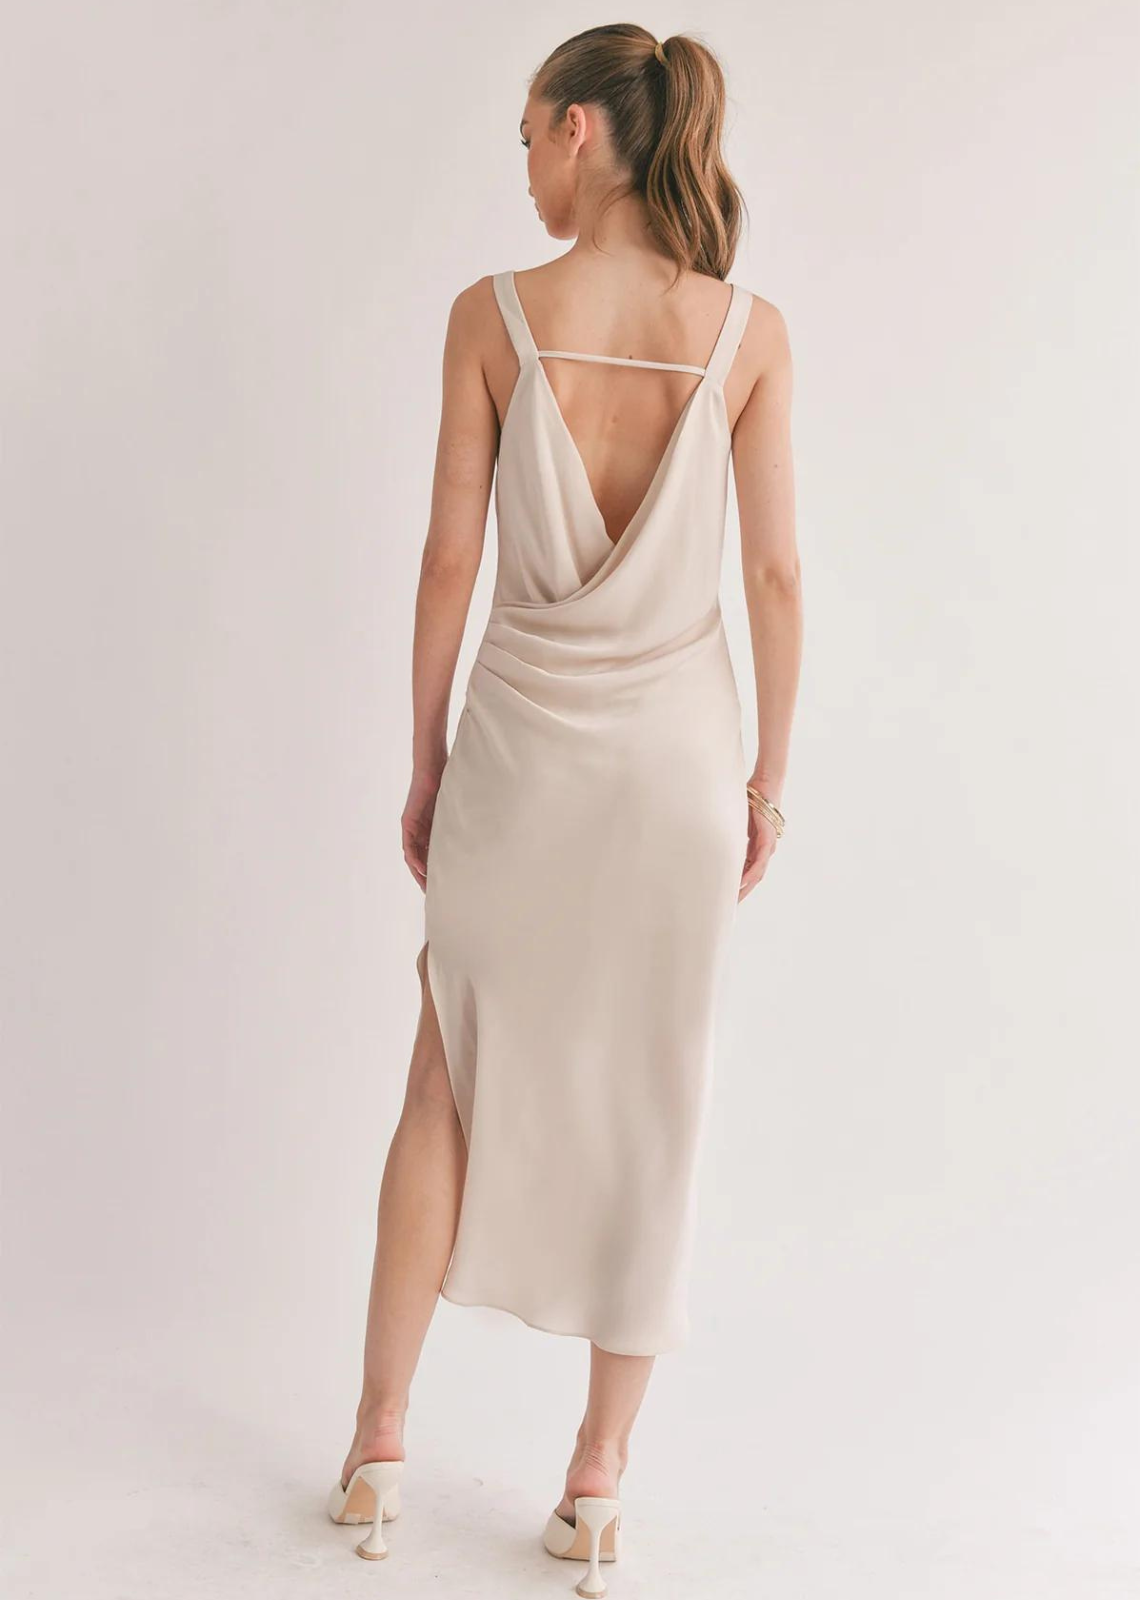 Sage The Label Dream Skies Low Back Cowl Midi Dress. Midi Dress Cowl Neck Low Back SELF: 100% Polyester LINING: 92% Polyester 8% Spandex Style # LG1332